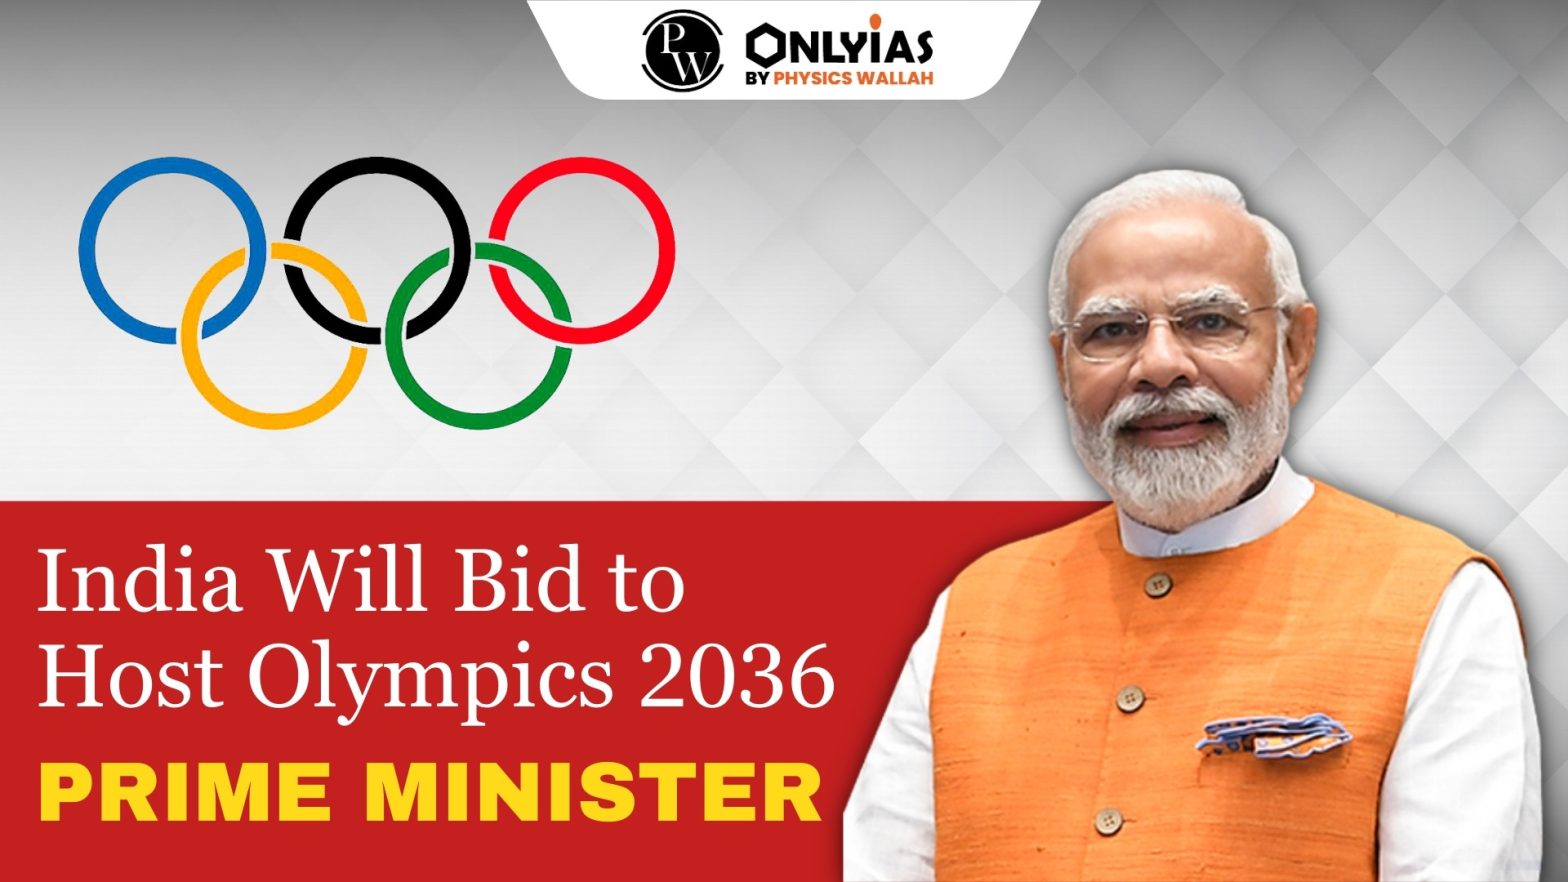 India Will Bid to Host Olympics 2036: Prime Minister